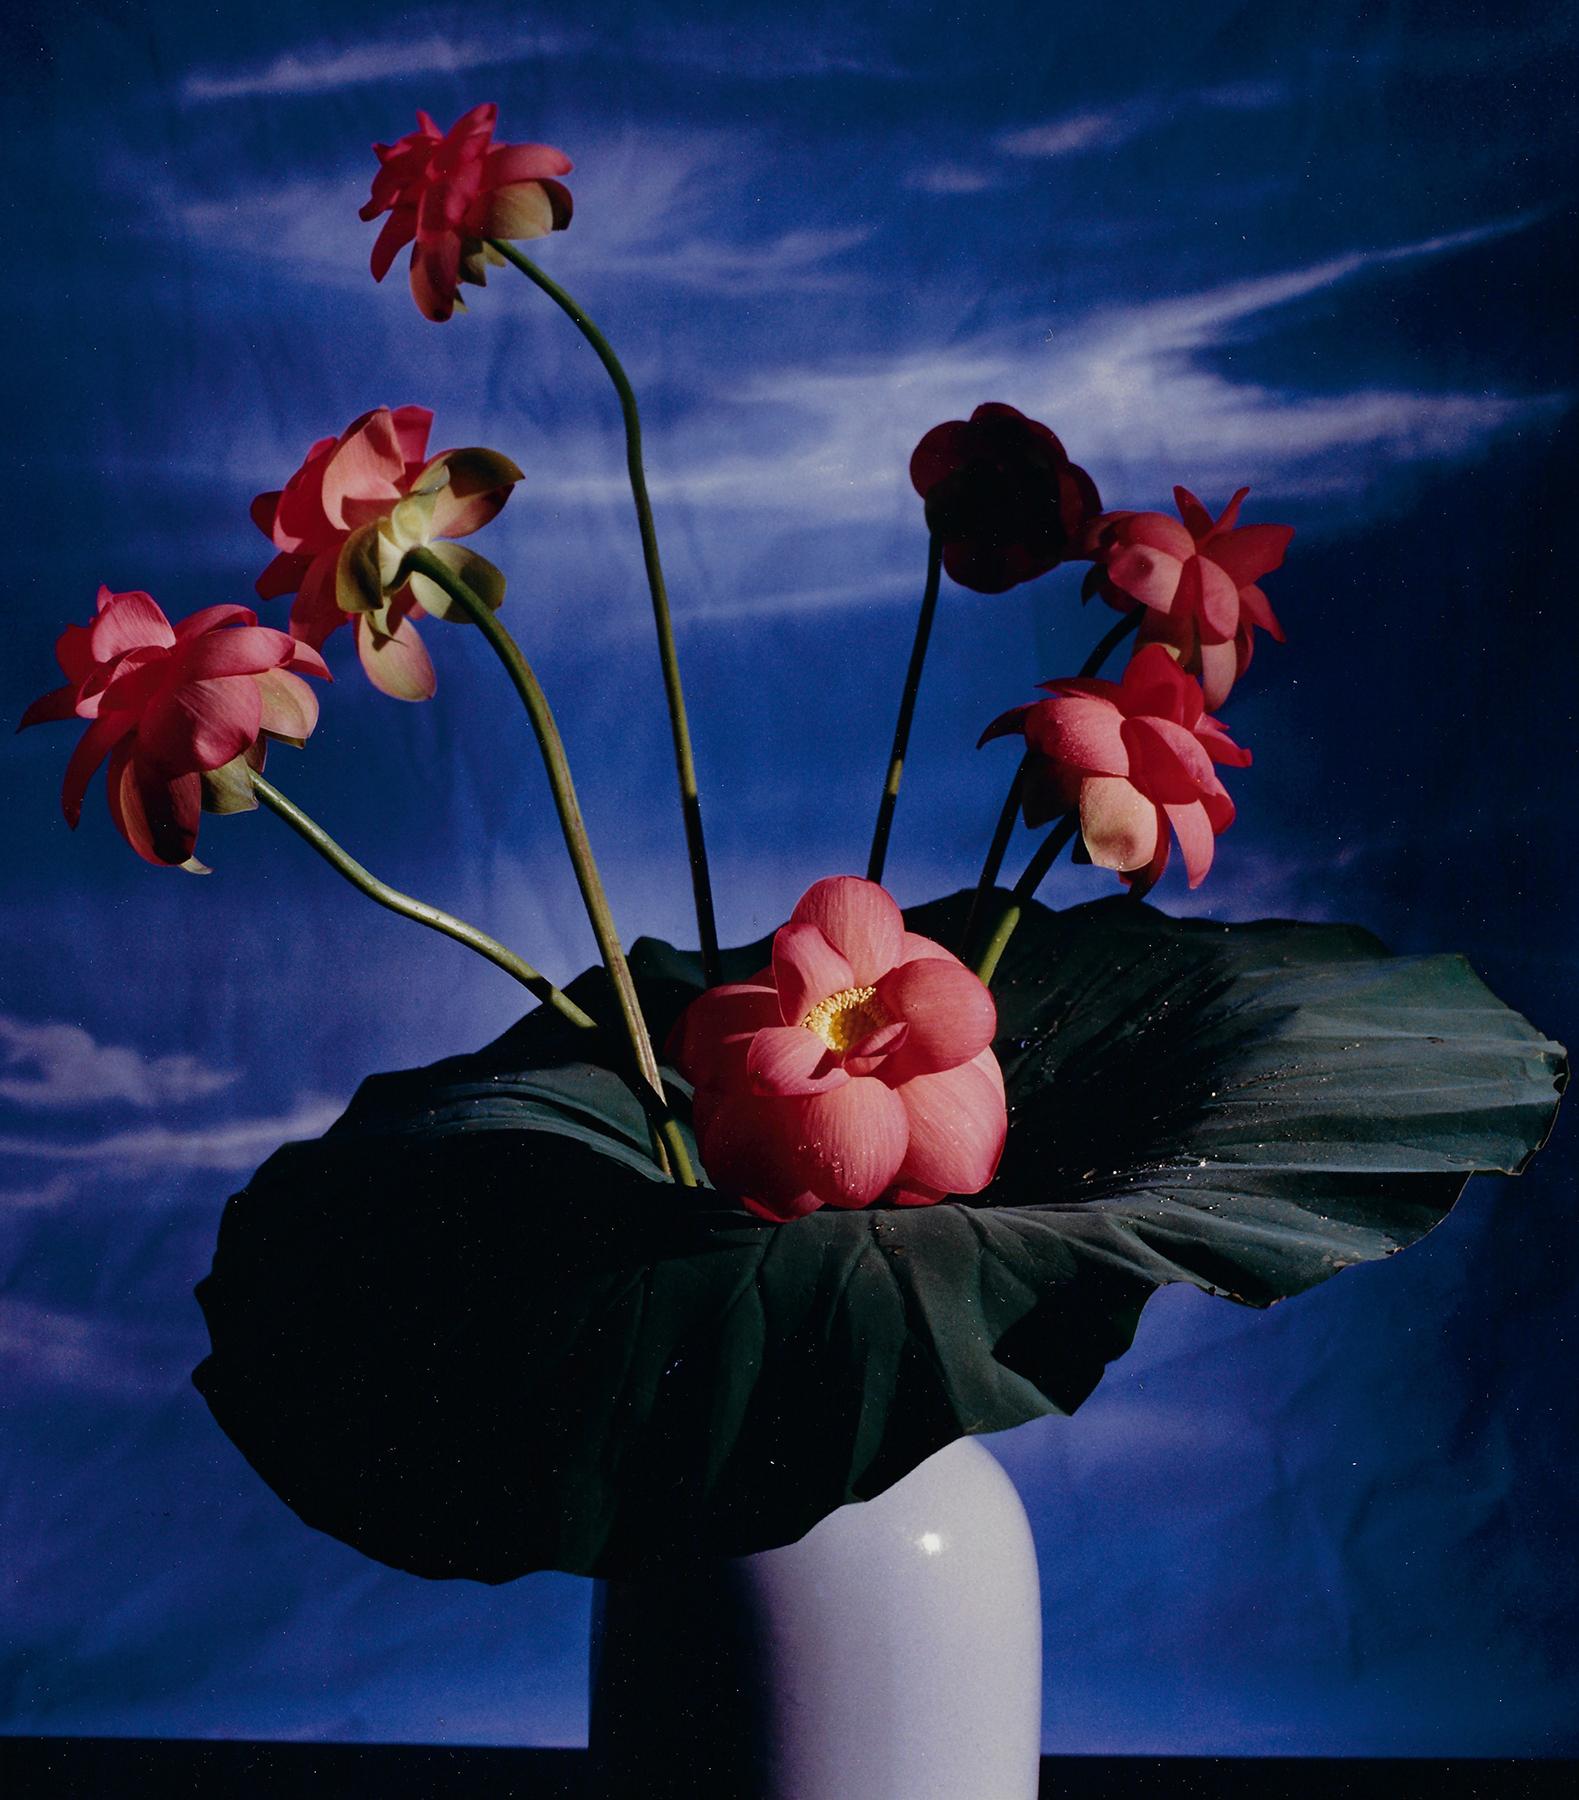 Lotus - Photograph by Horst P. Horst